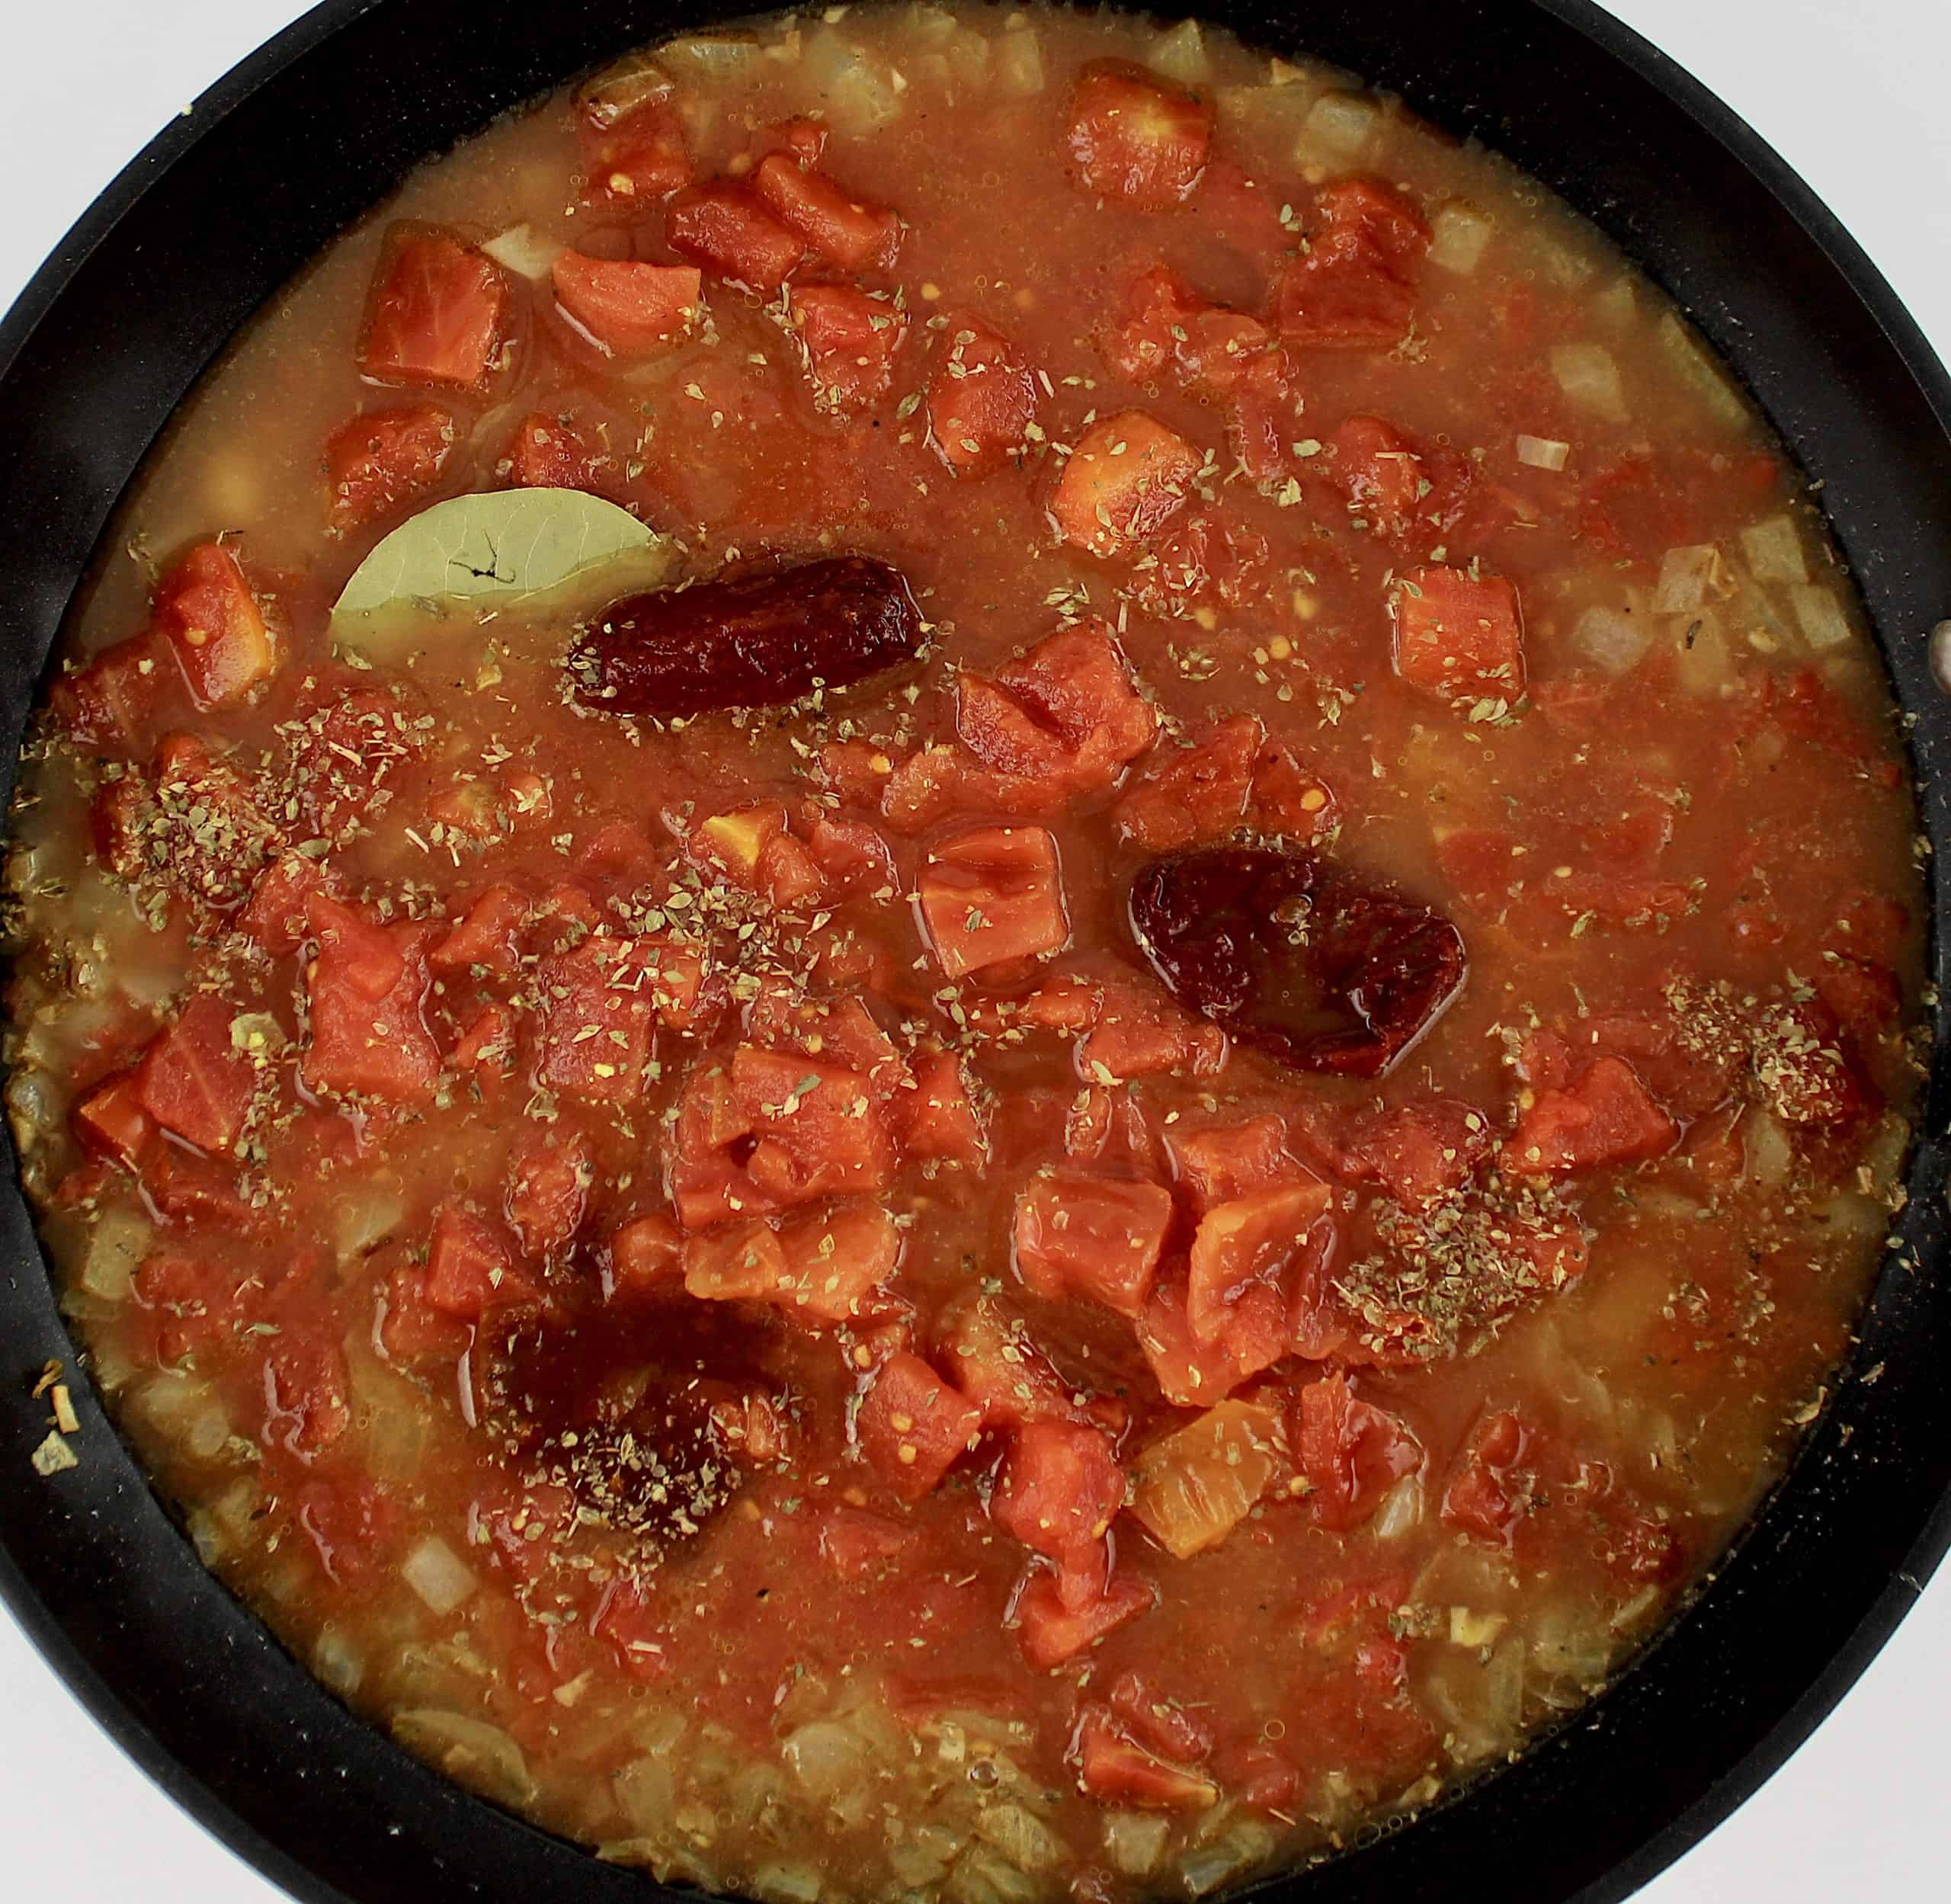 Chicken Tinga sauce uncooked in skillet